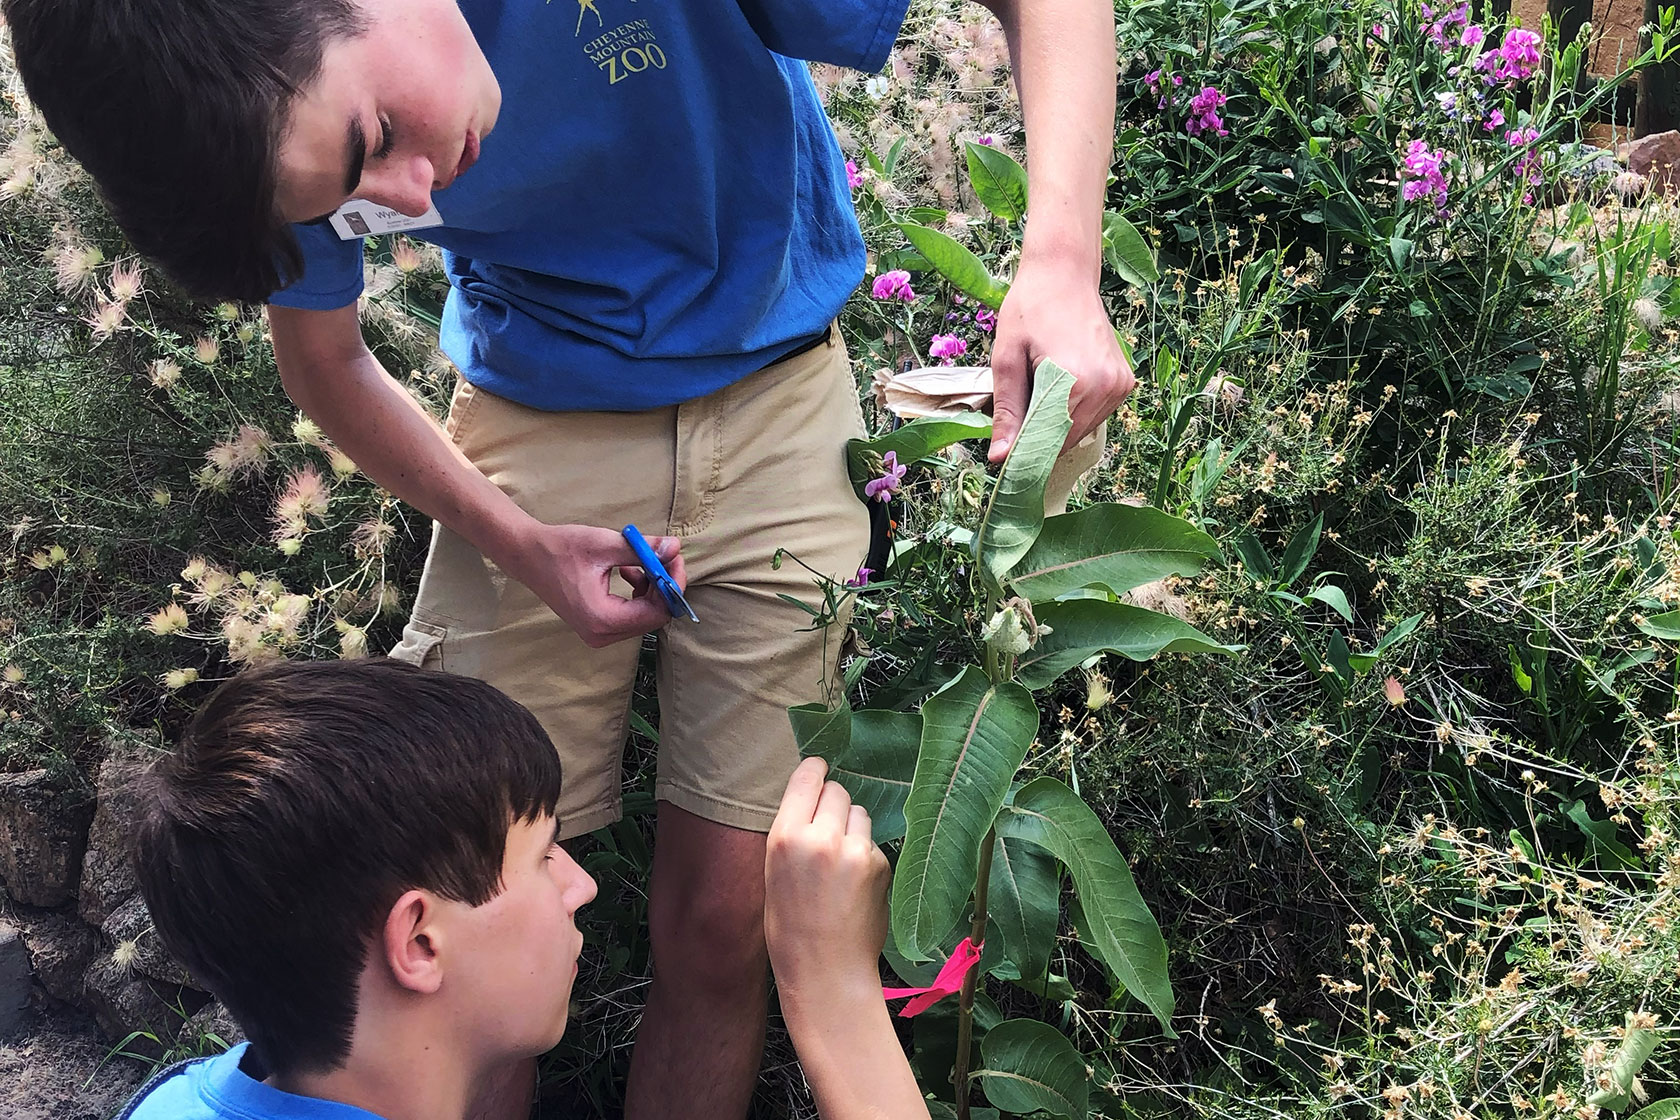 Kids cutting flowers at the Zoo during an Outdoor program